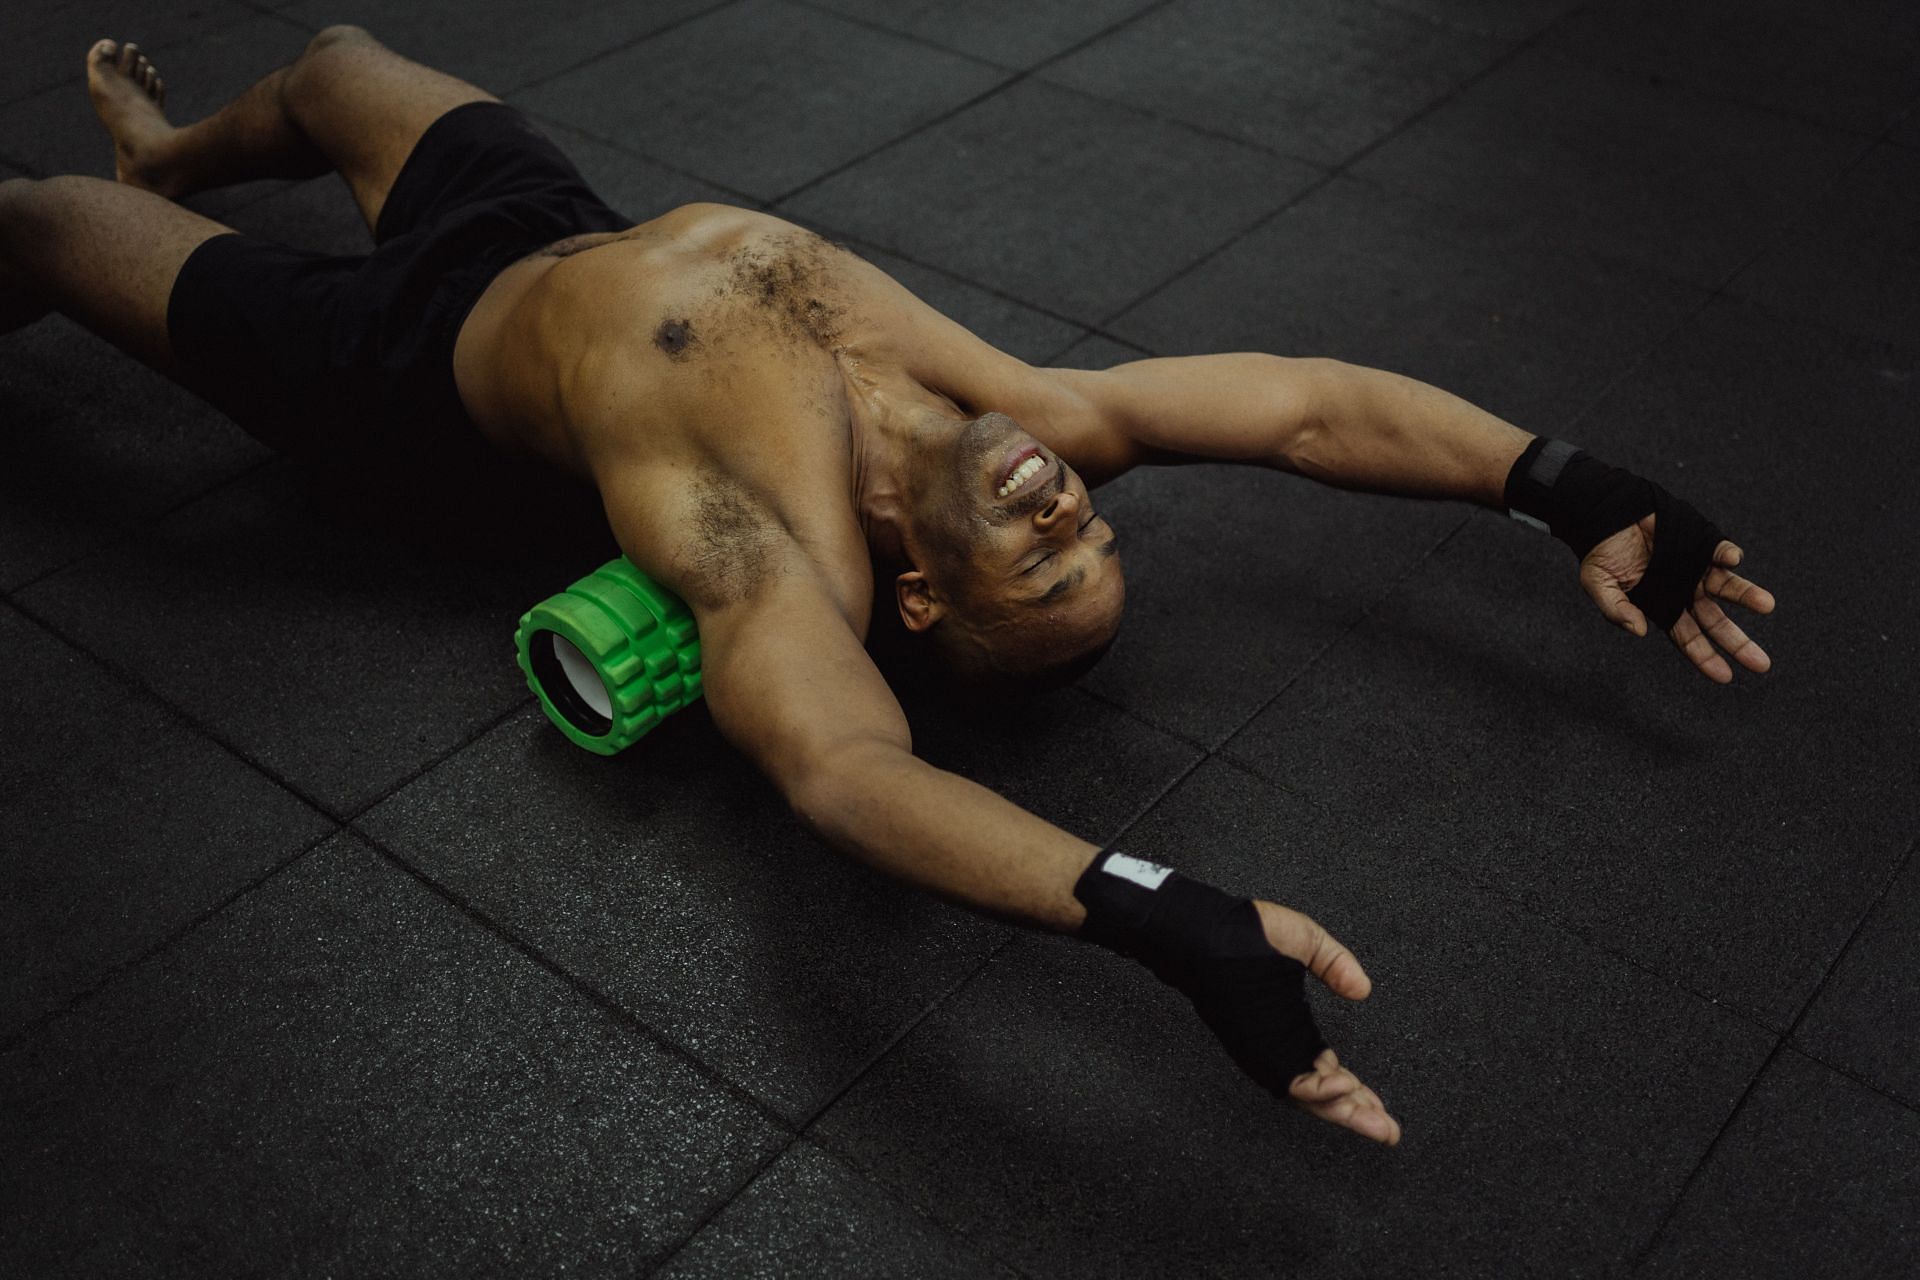 Foam rolling employs friction to relieve tension and realign the fascia, much like a massage. (Image via Pexels/ Ketut Subiyanto)